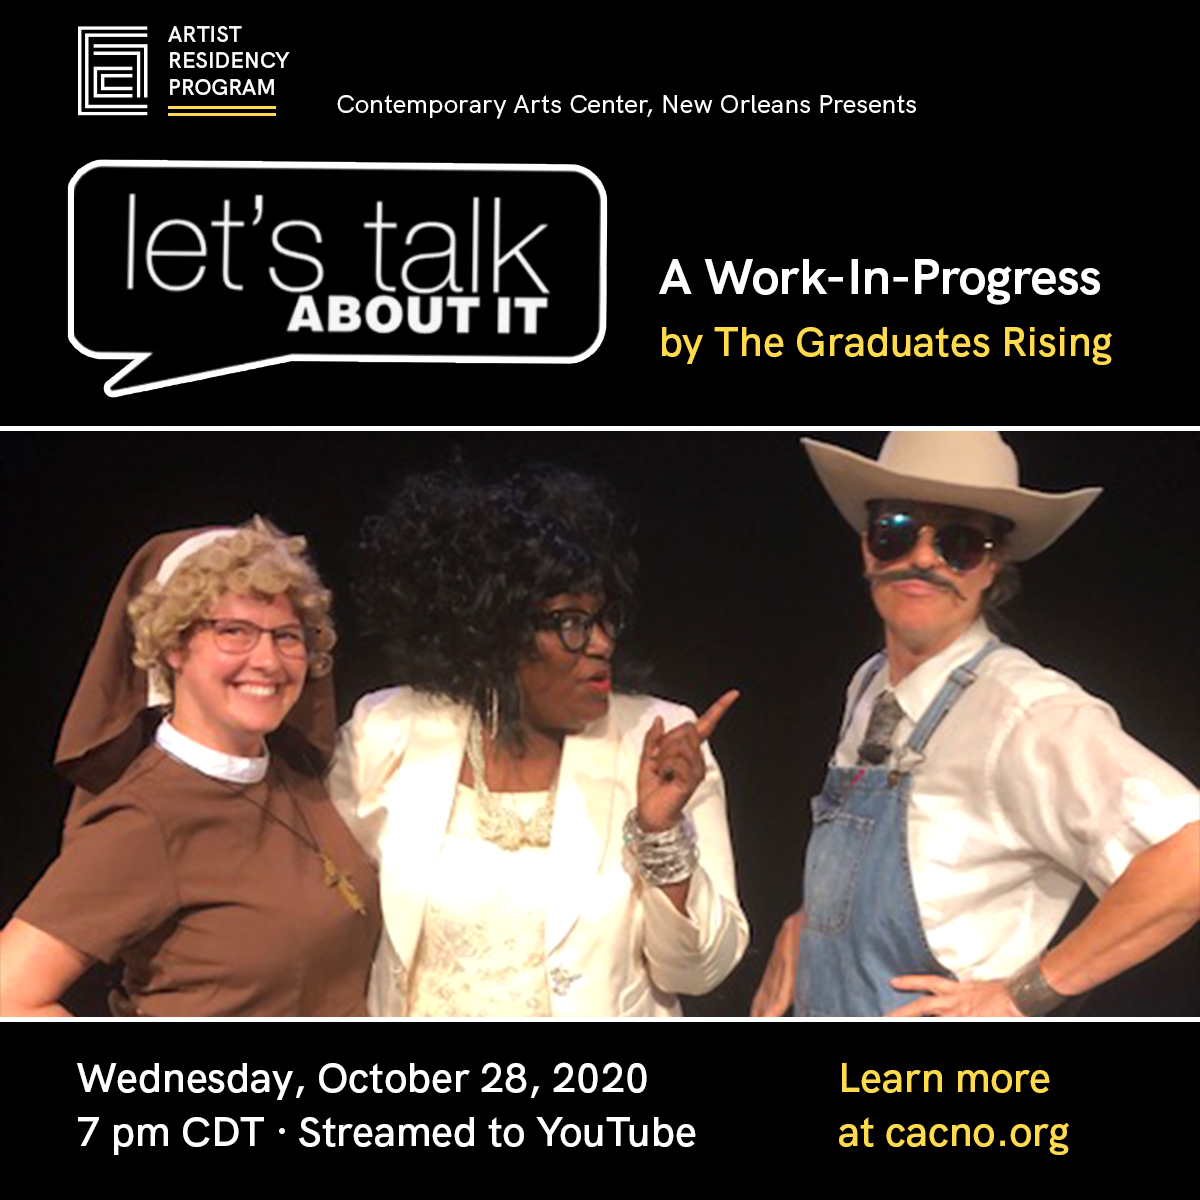 "Let's Talk About It" by The Graduates Rising - A Work In Progress